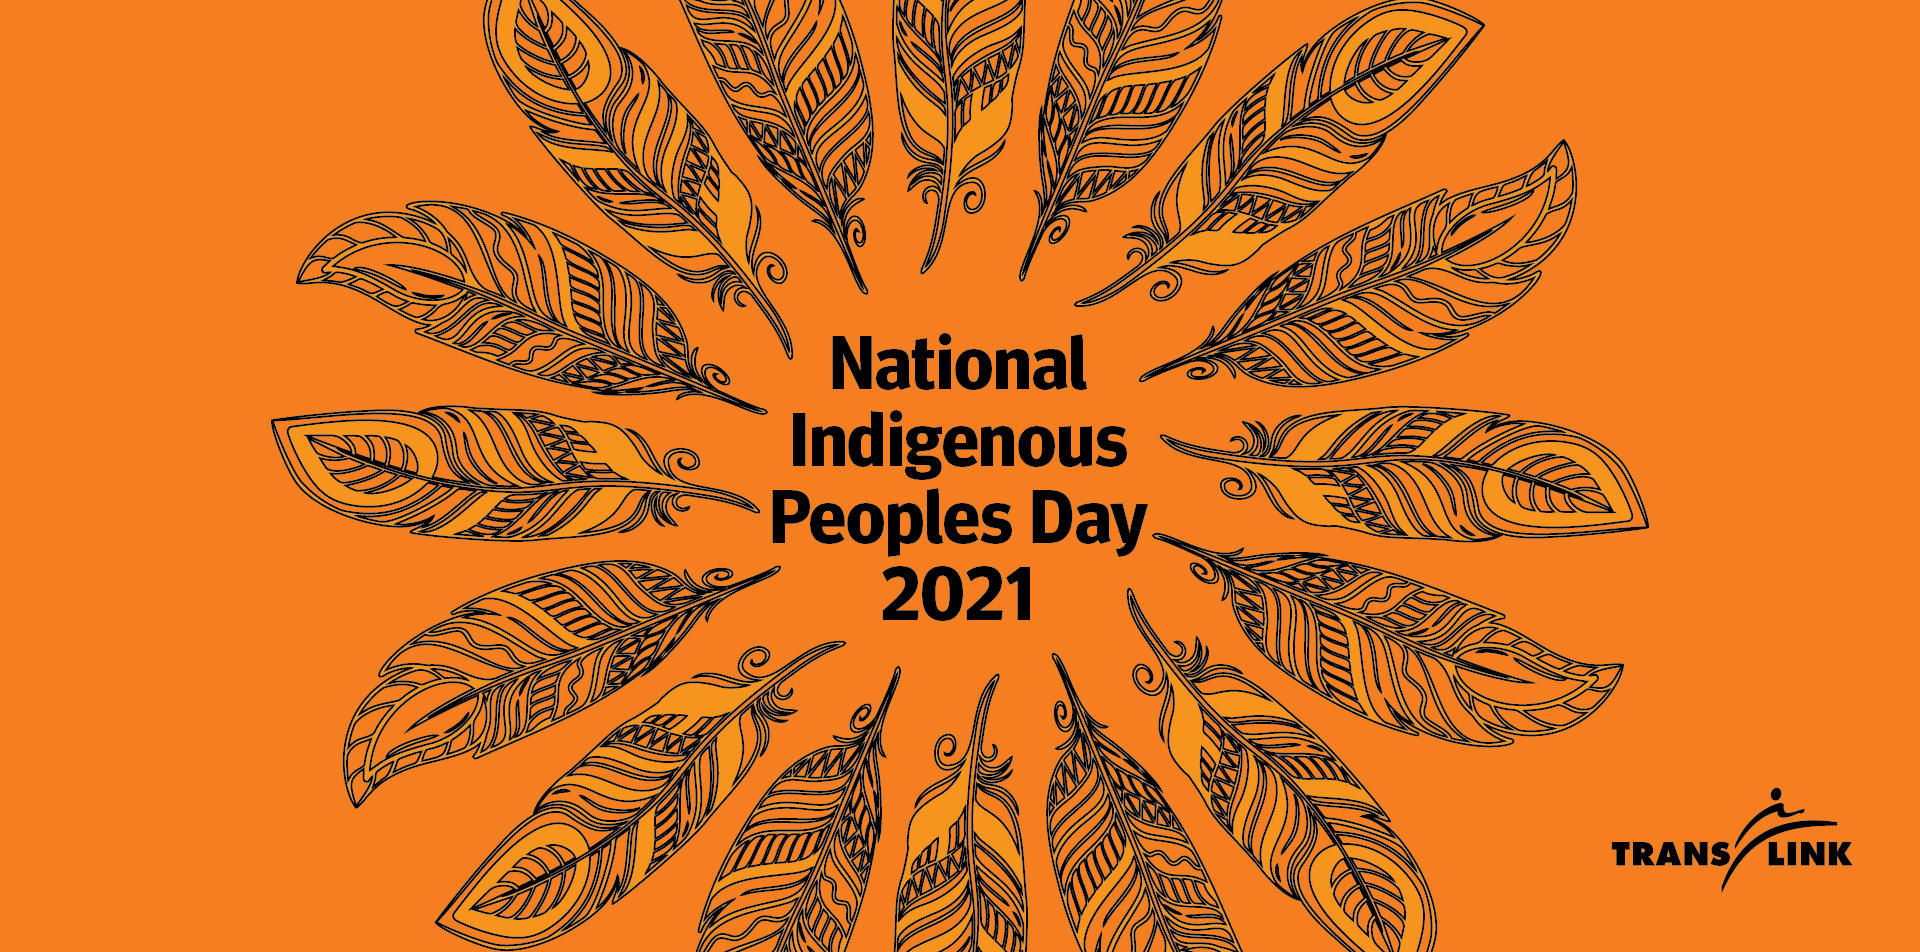 National Indigenous Peoples Day 2021 graphic